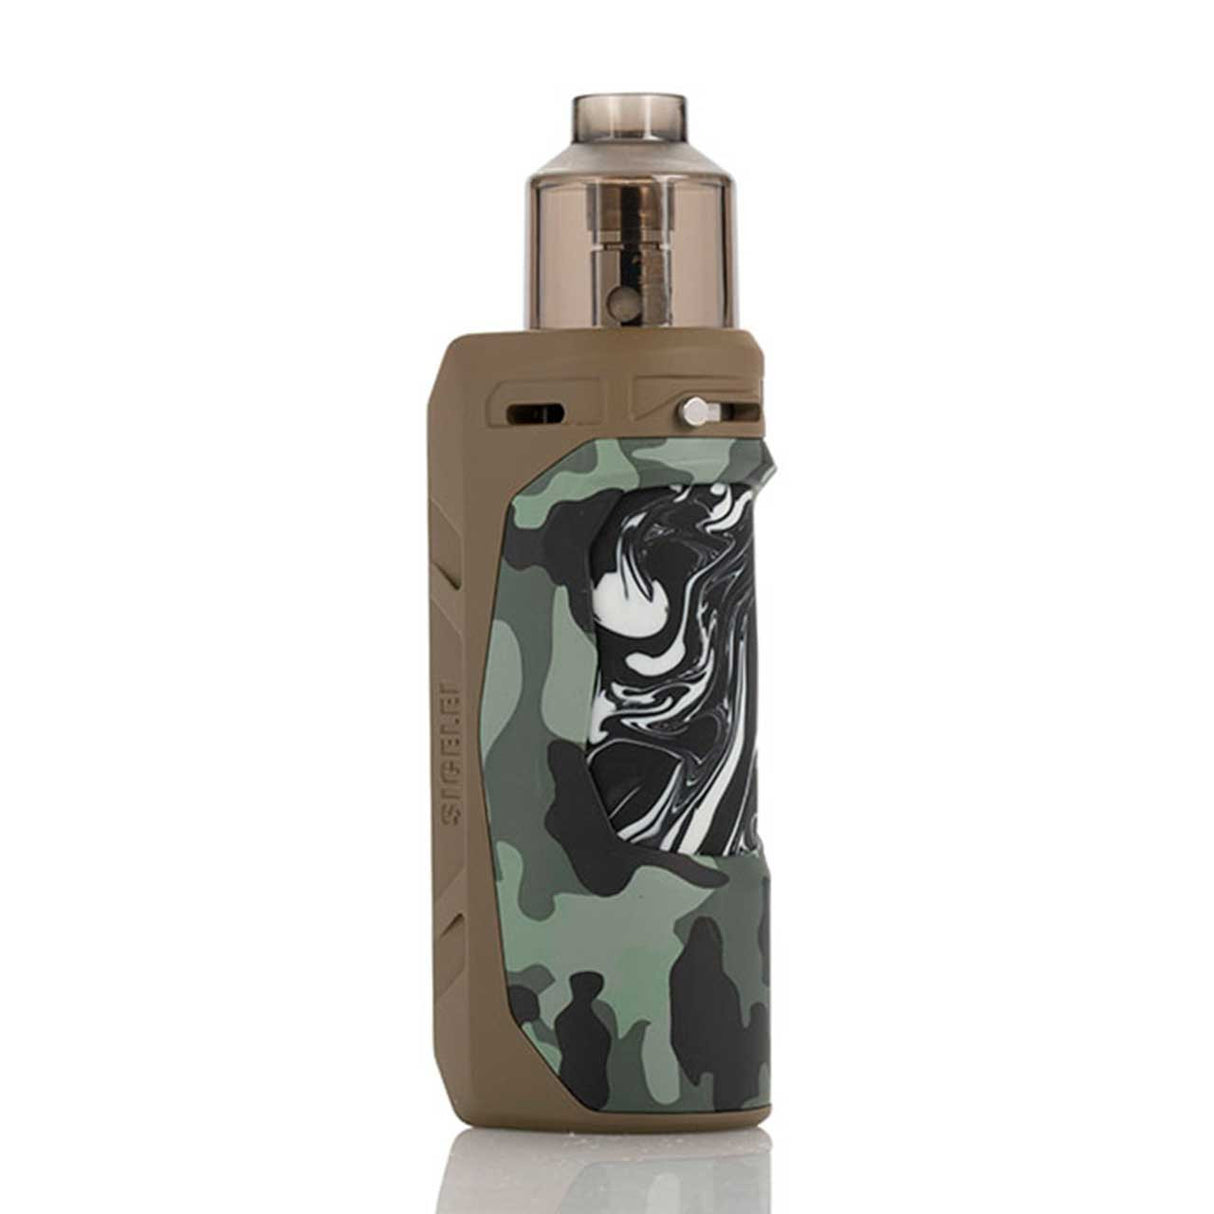 Sigelei HUMVEE 80W Box Mod Starter Kit with zinc-alloy body and rubberized hand grip. Khaki Color Option